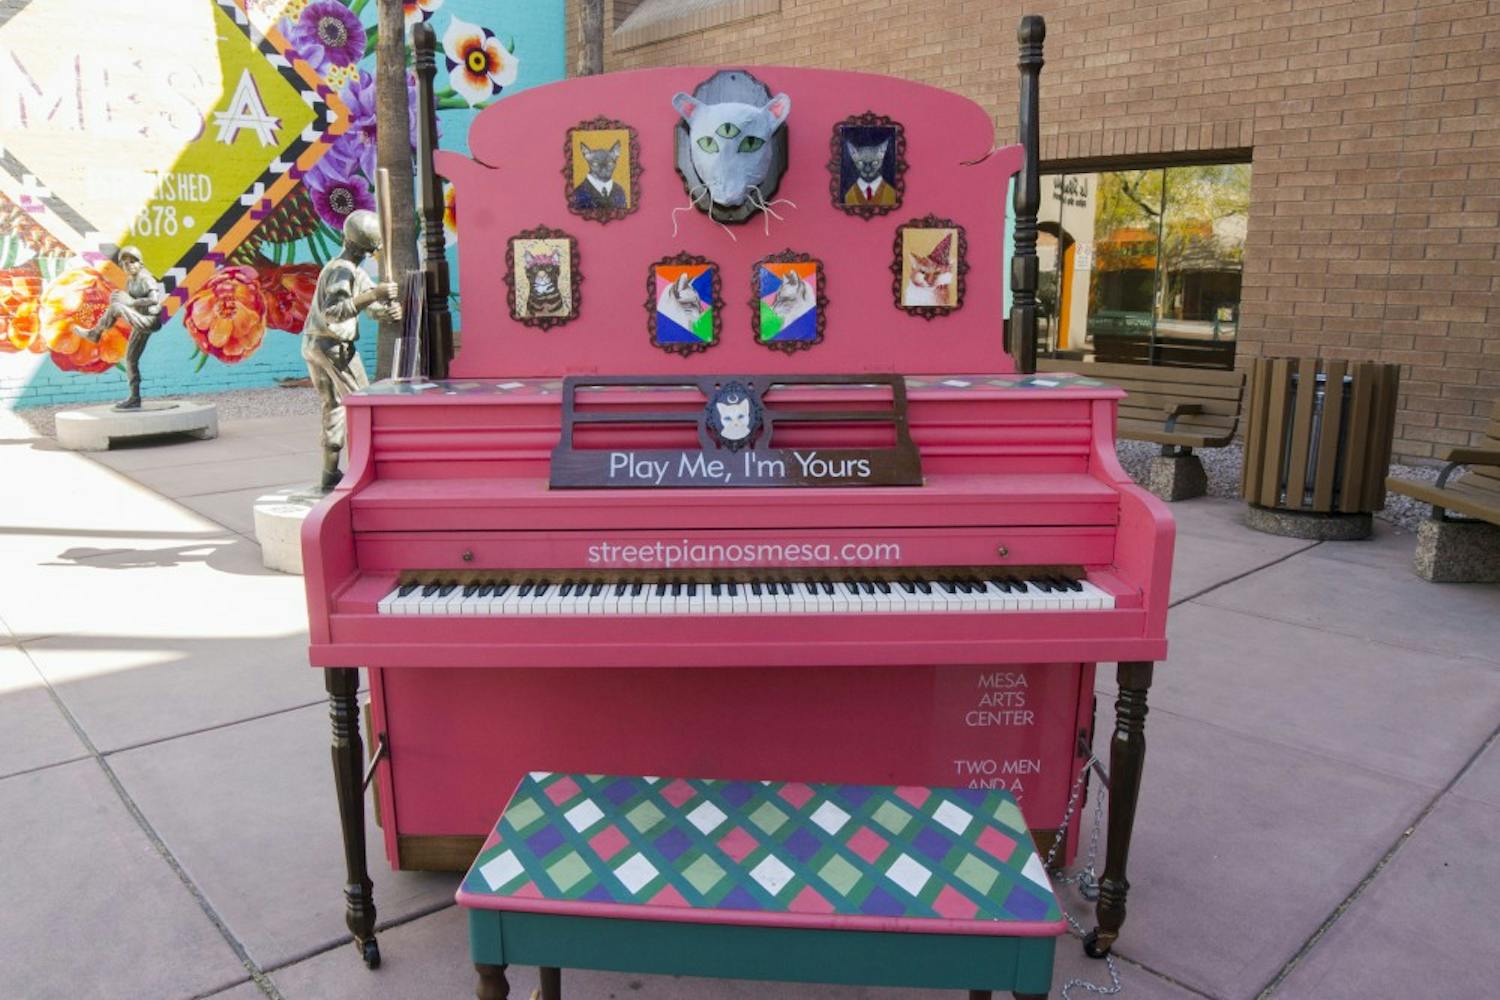 A piano that is part of the traveling art exhibit 'Play Me, I'm Yours' is pictured in Mesa, Arizona, on Sunday, March 13, 2016.&nbsp;&nbsp;